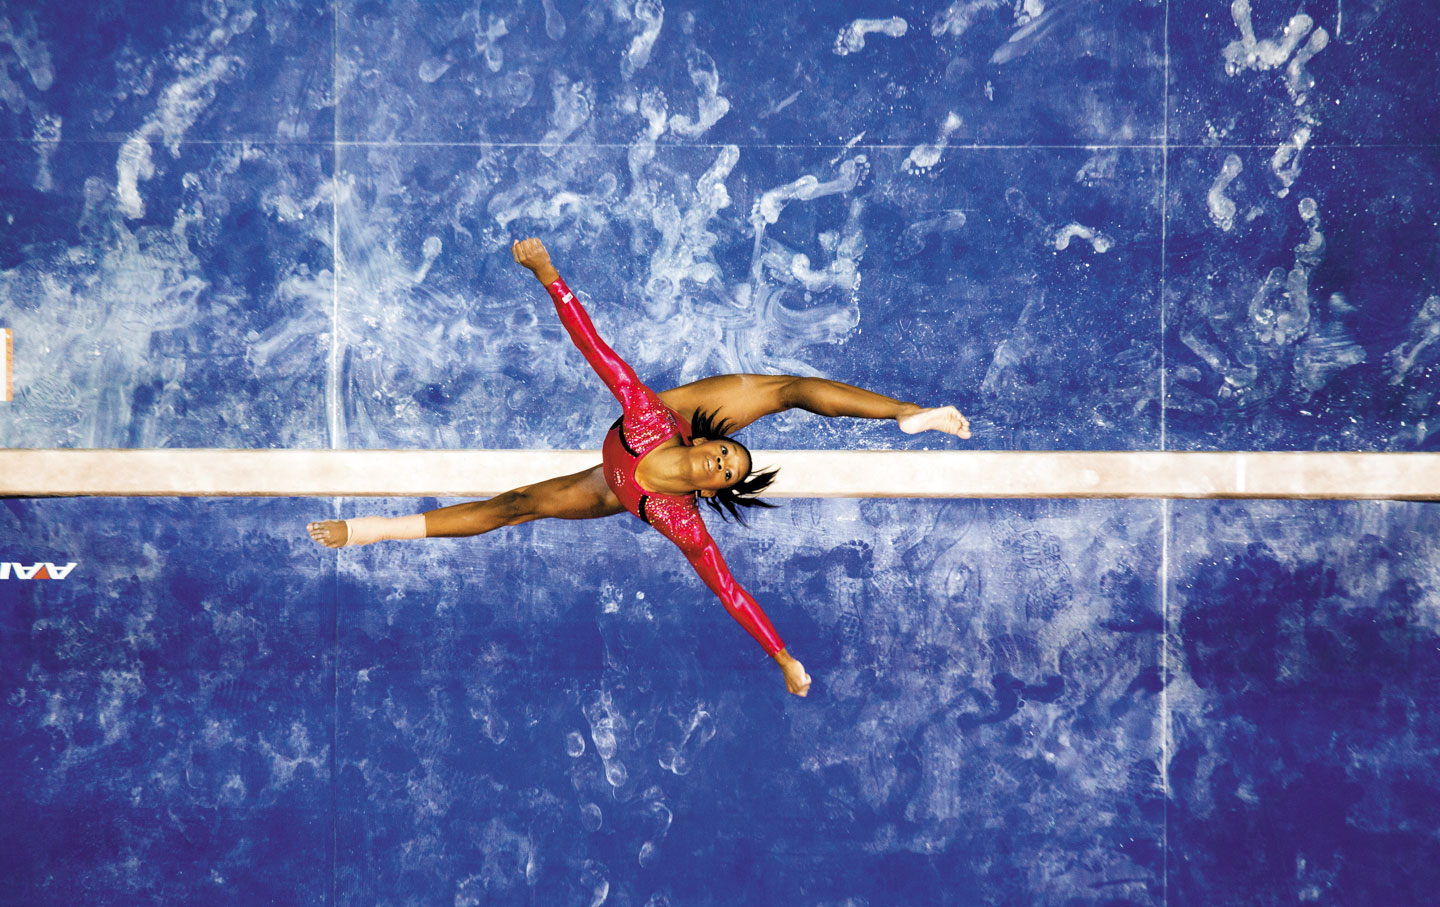 Gabby Douglas at the 2012 Olympic trials in San Jose, California (Peter Read Miller)